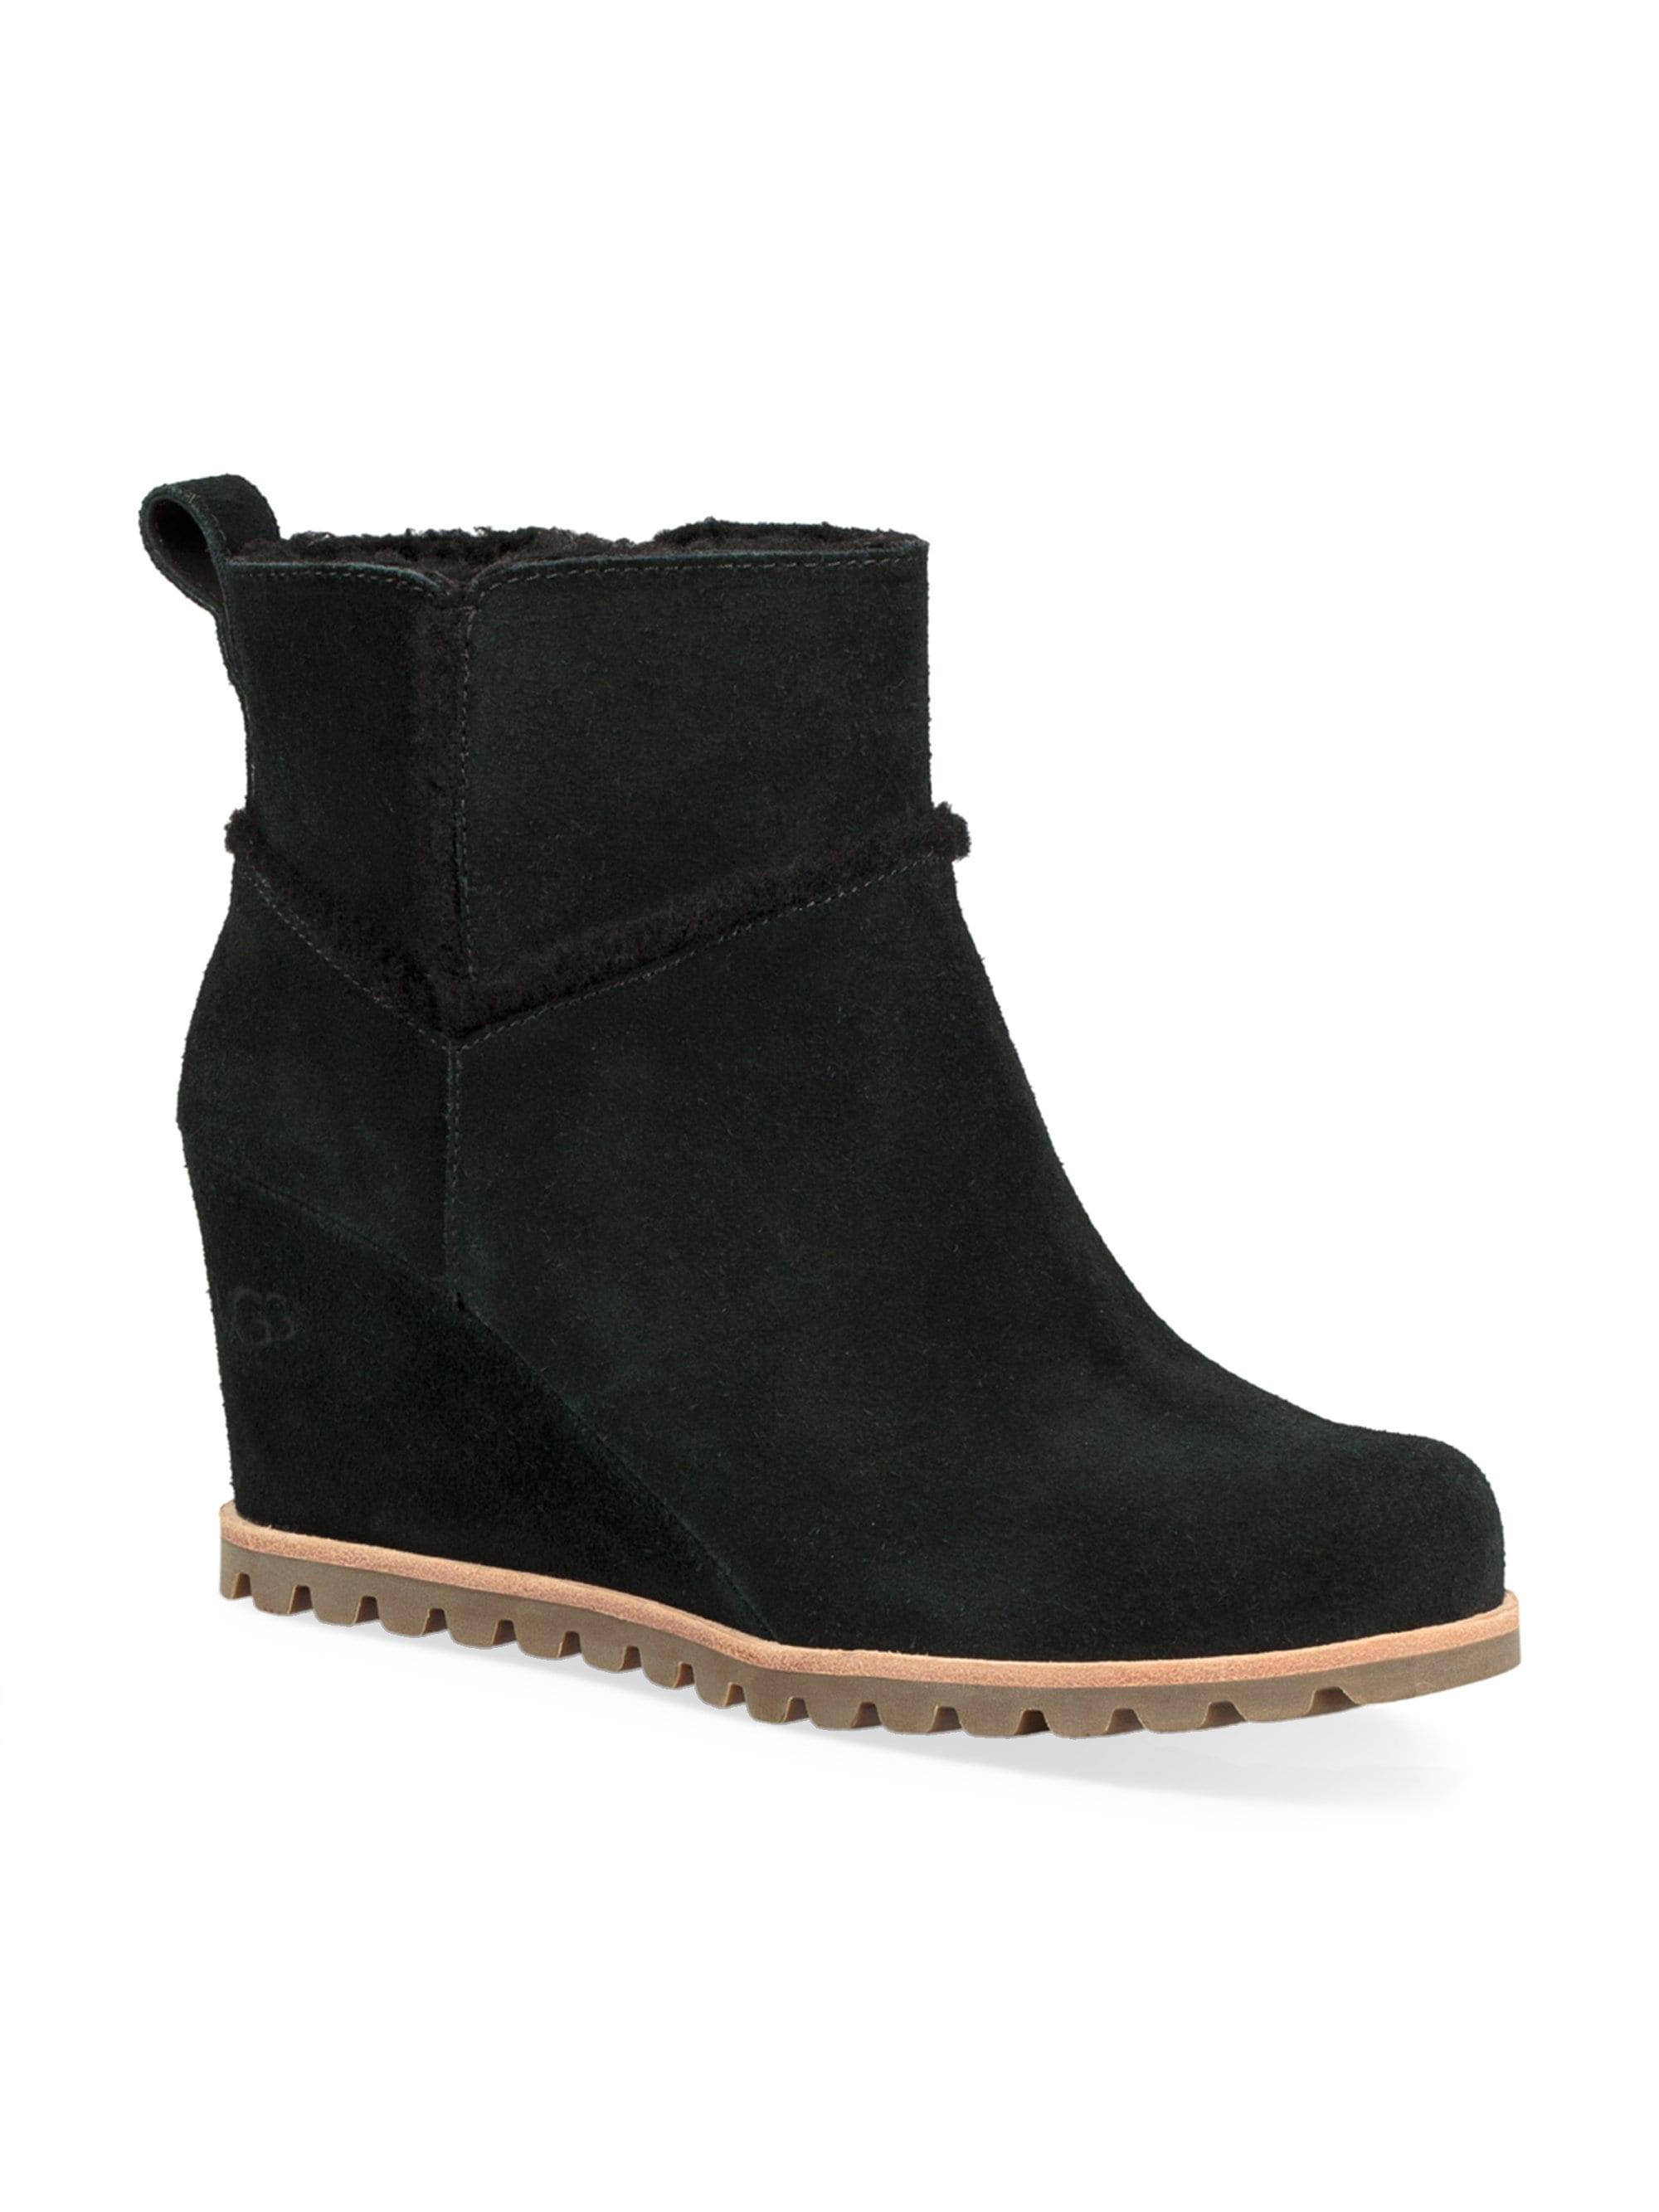 UGG Marte Suede Wedge Boots in Black - Lyst